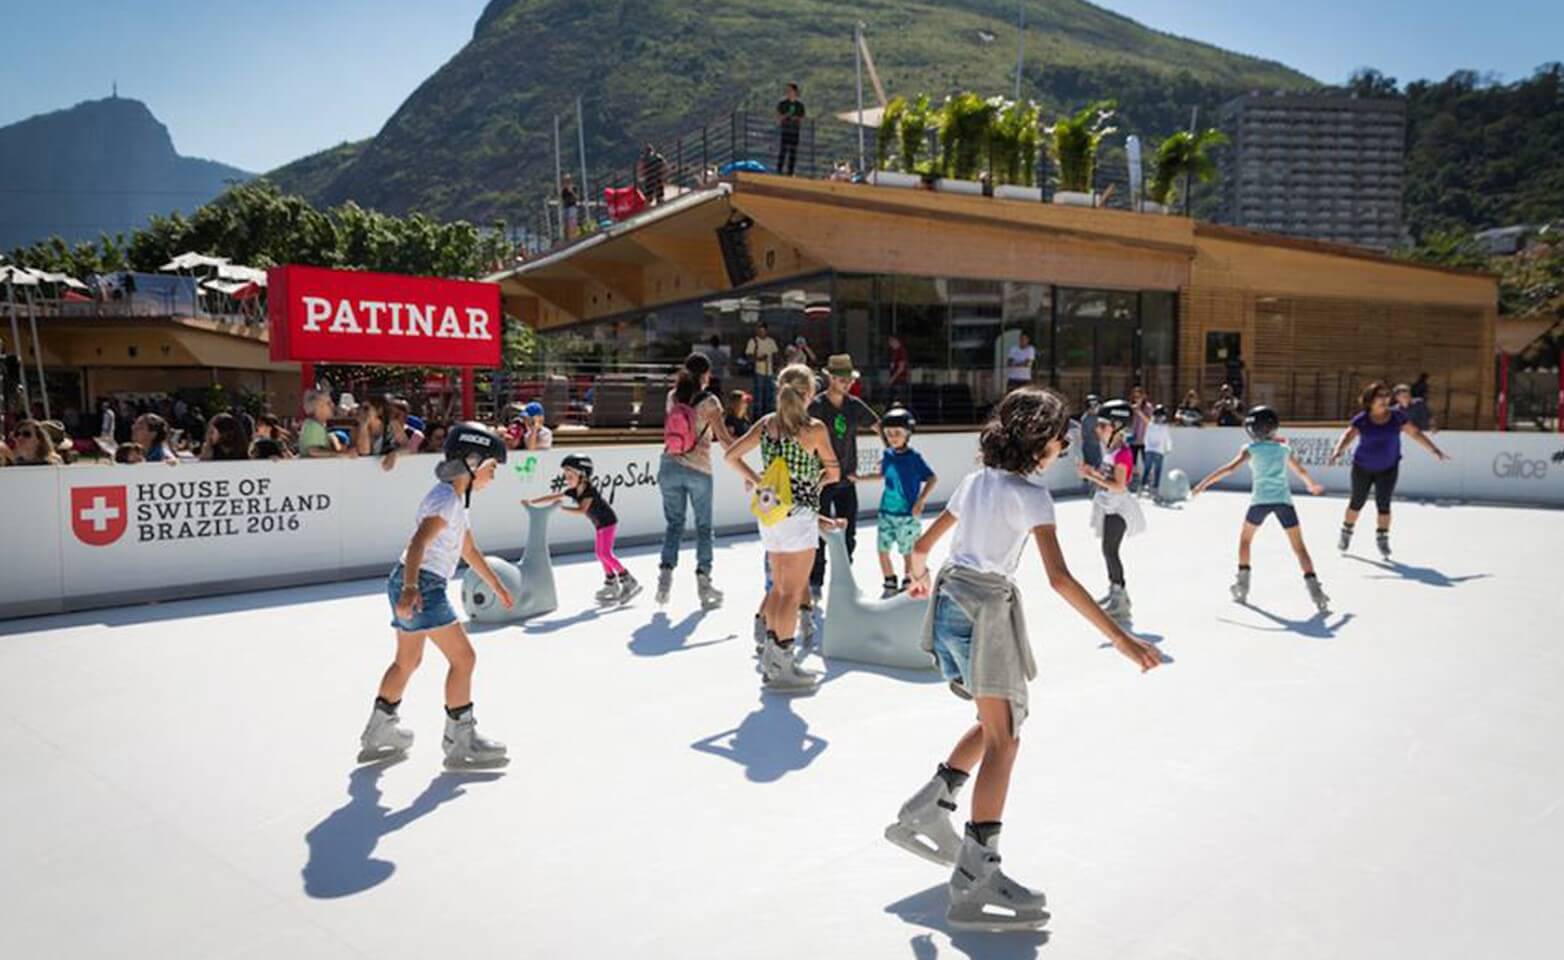 Synthetic ice rink at the Olympic Summer games 2016 in Brazil